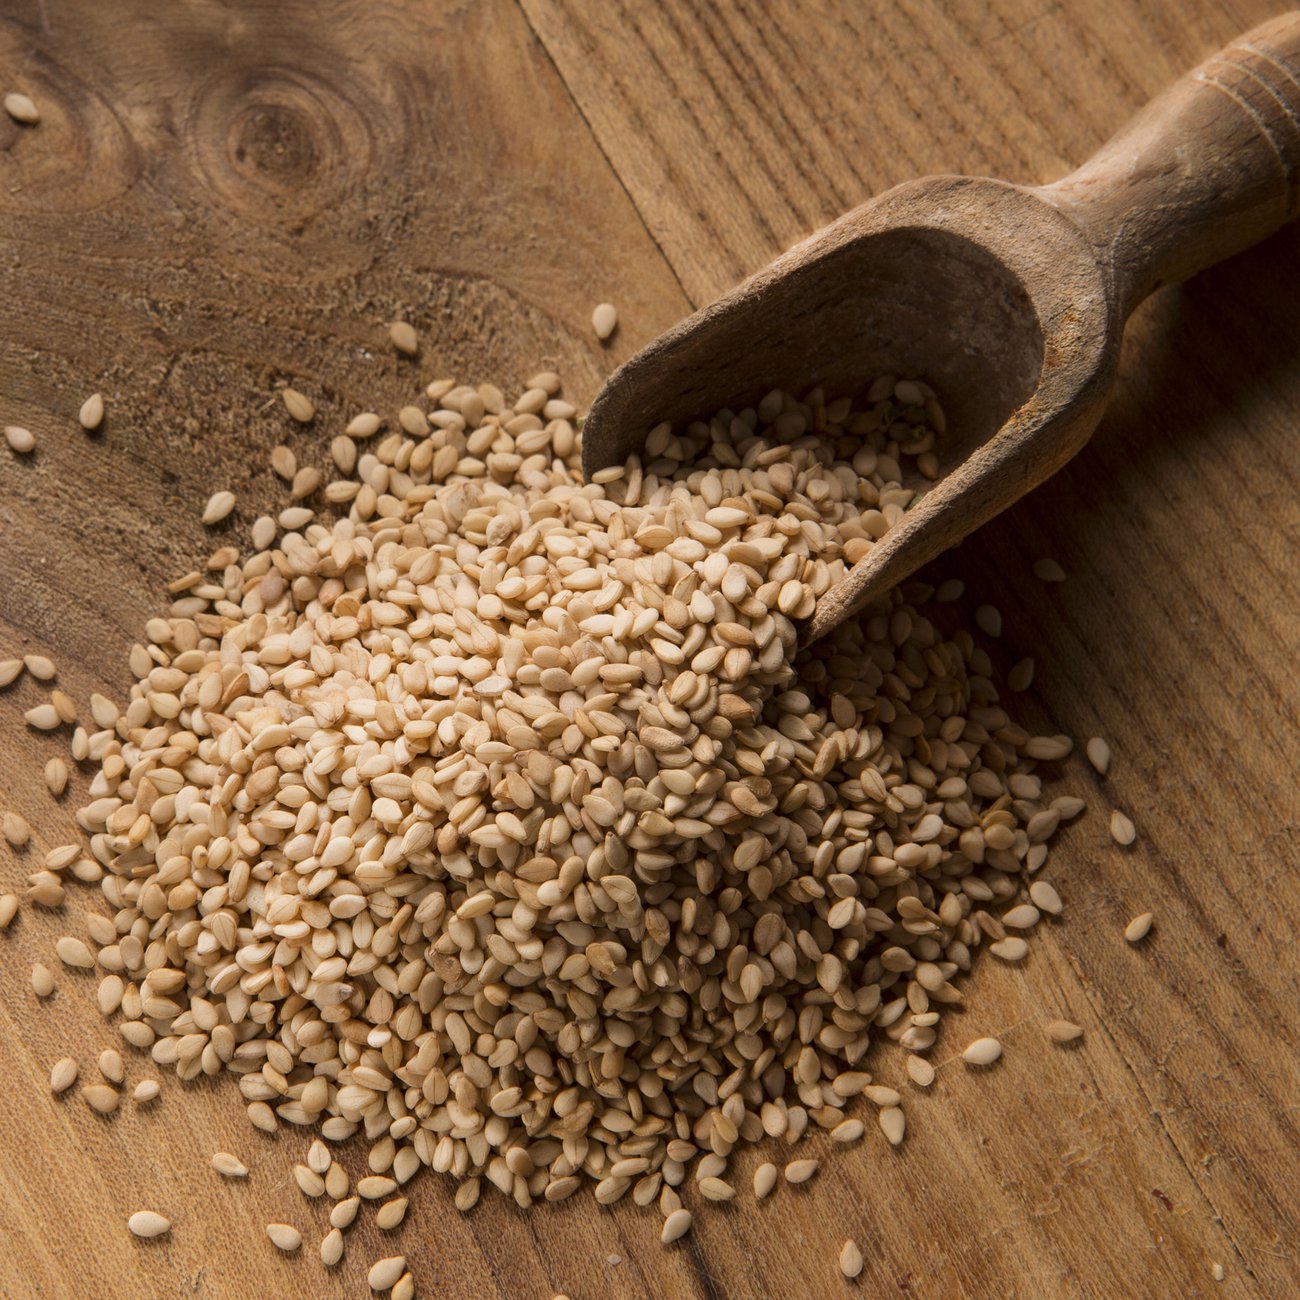 Sesame seeds can be turned into tahini